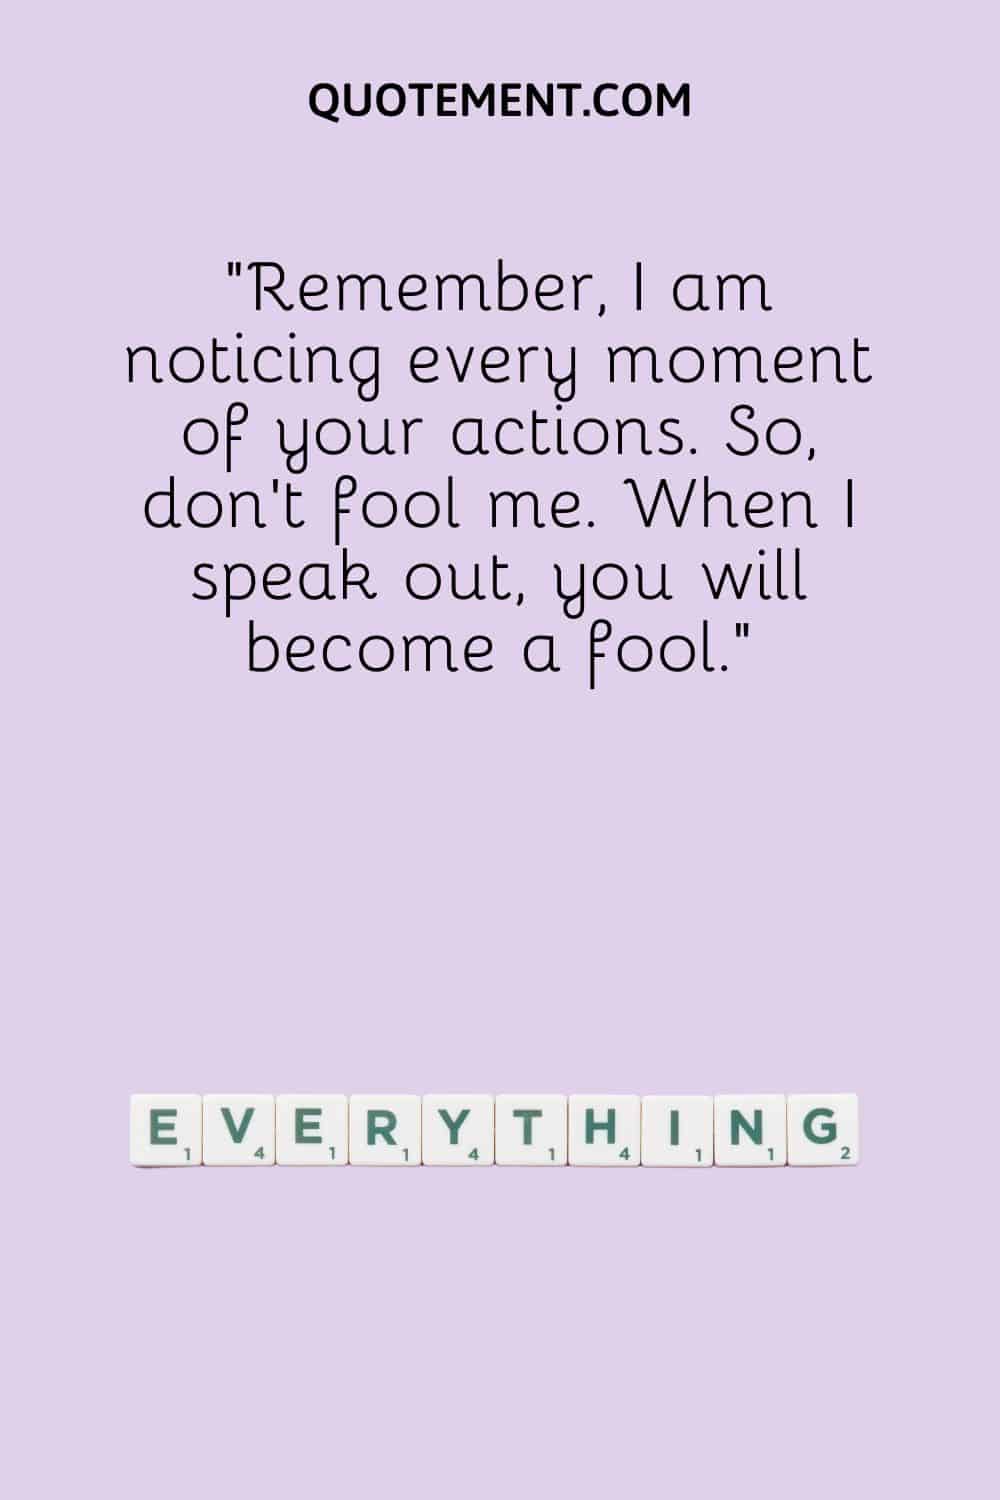 Remember, I am noticing every moment of your actions